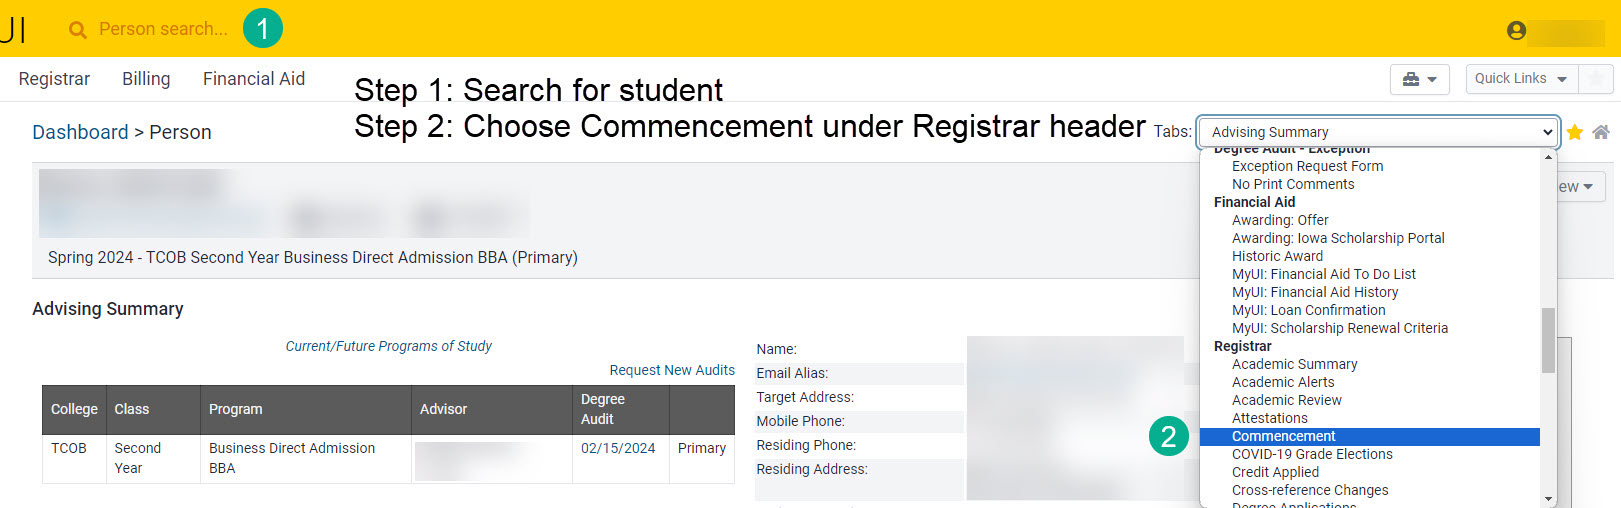 Within a student's record the user selects Commencement from the tabs dropdown at the top right of the screen.